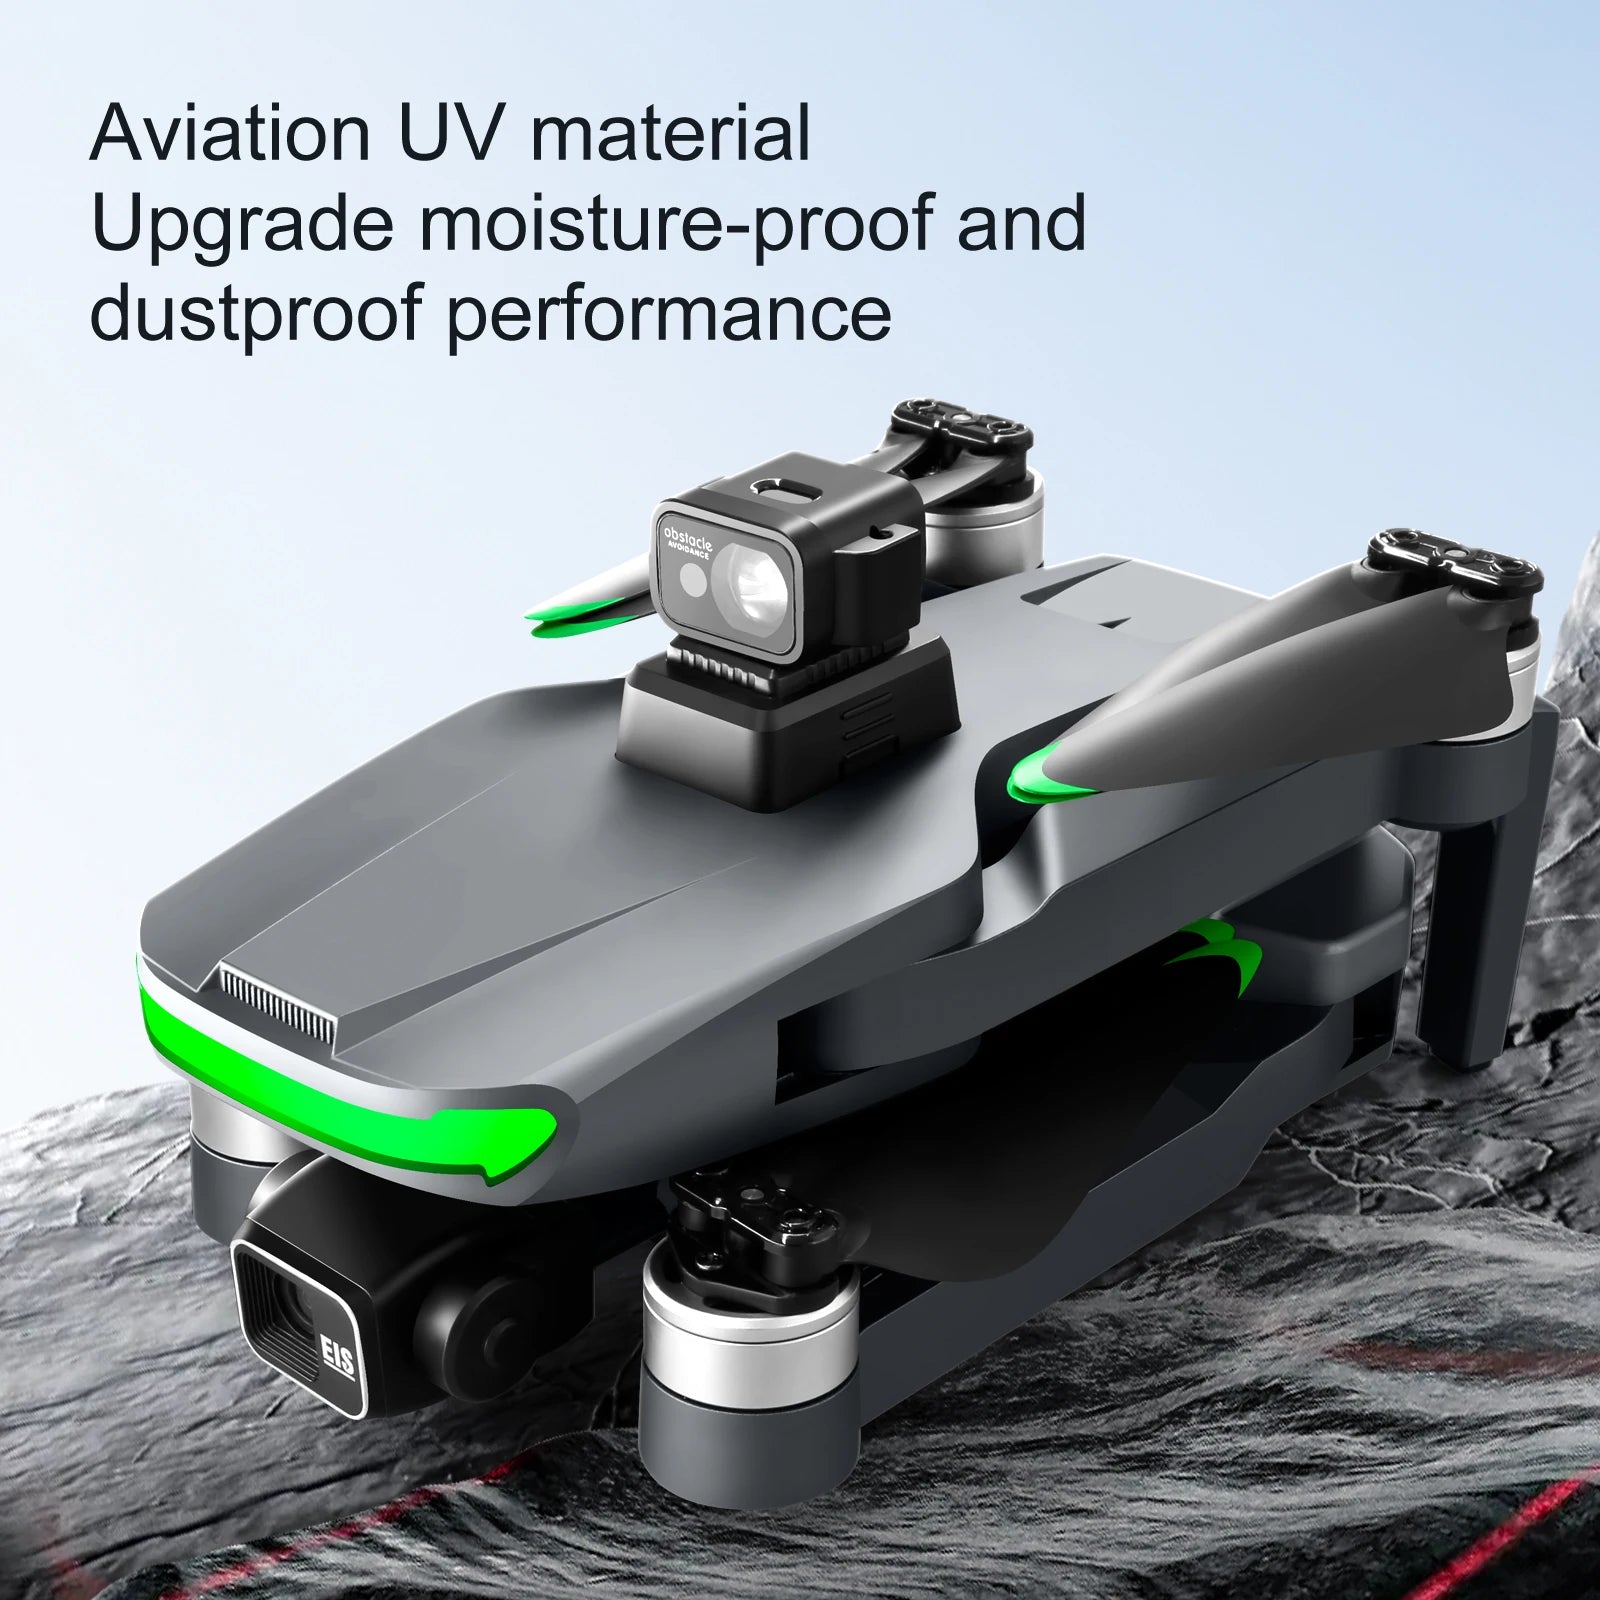 S155 Pro GPS Drone, Aviation UV material Upgrade moisture-proof and dustproof performance 66] obslodle